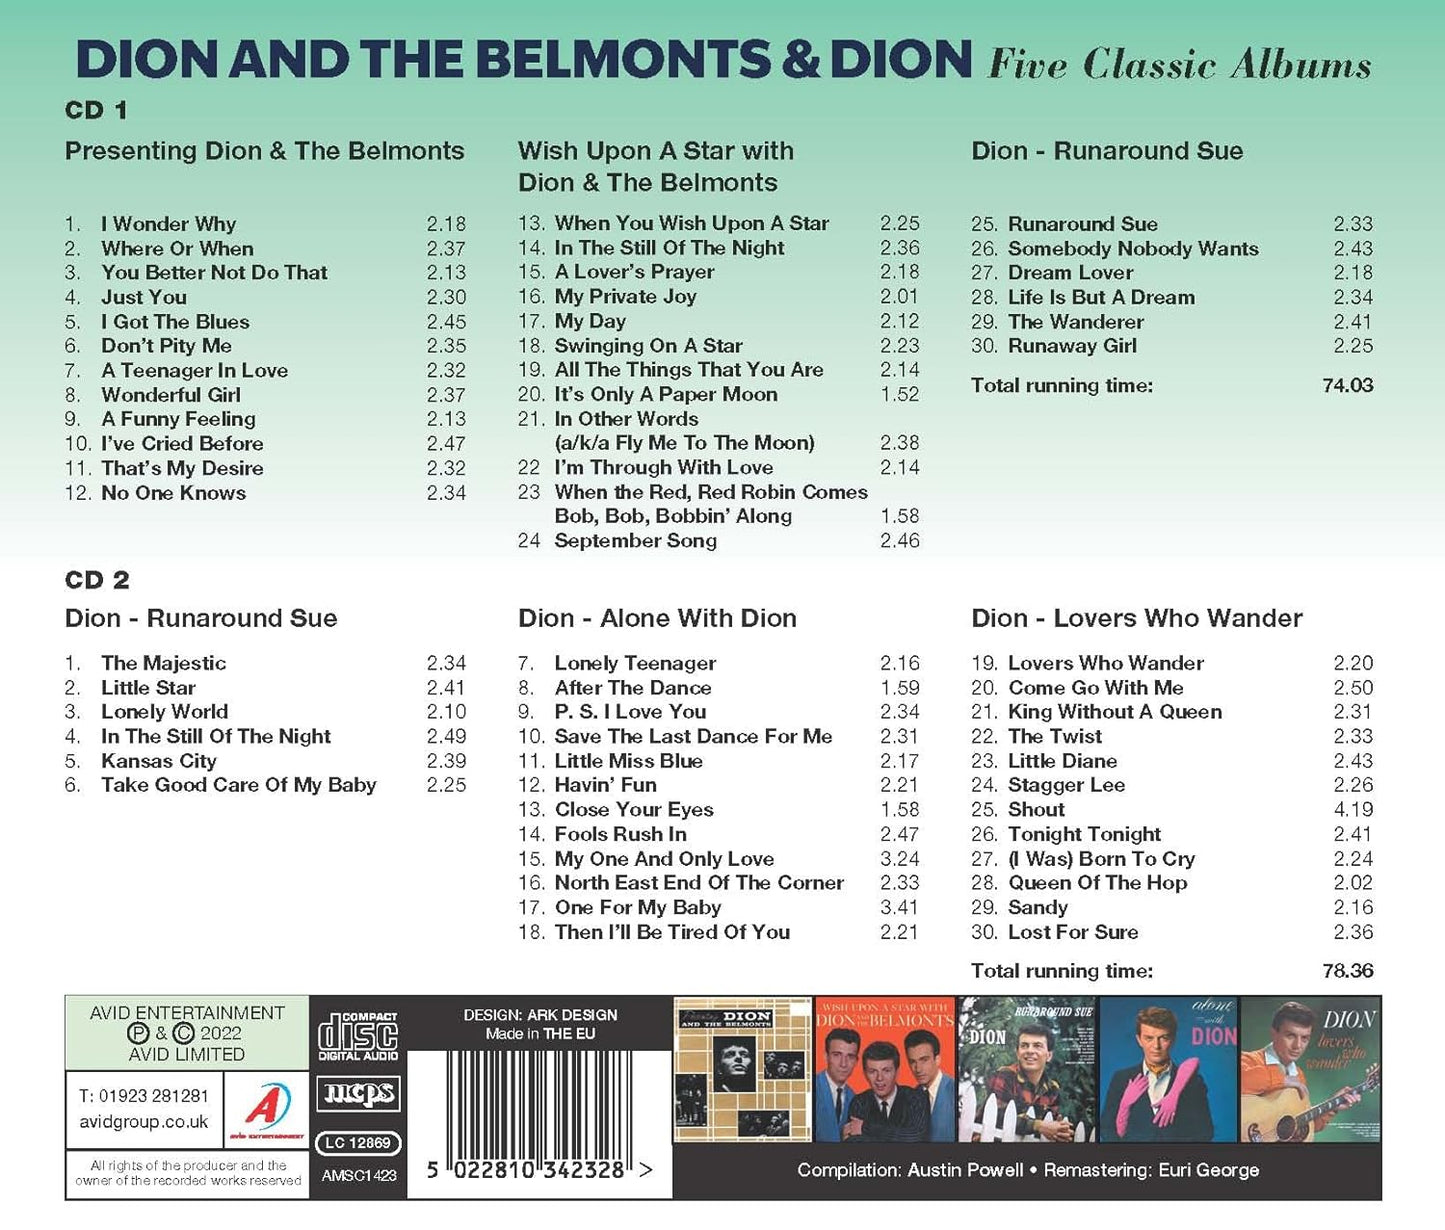 DION AND THE BELMONTS / DION - Five Classic Albums (2 CDs)